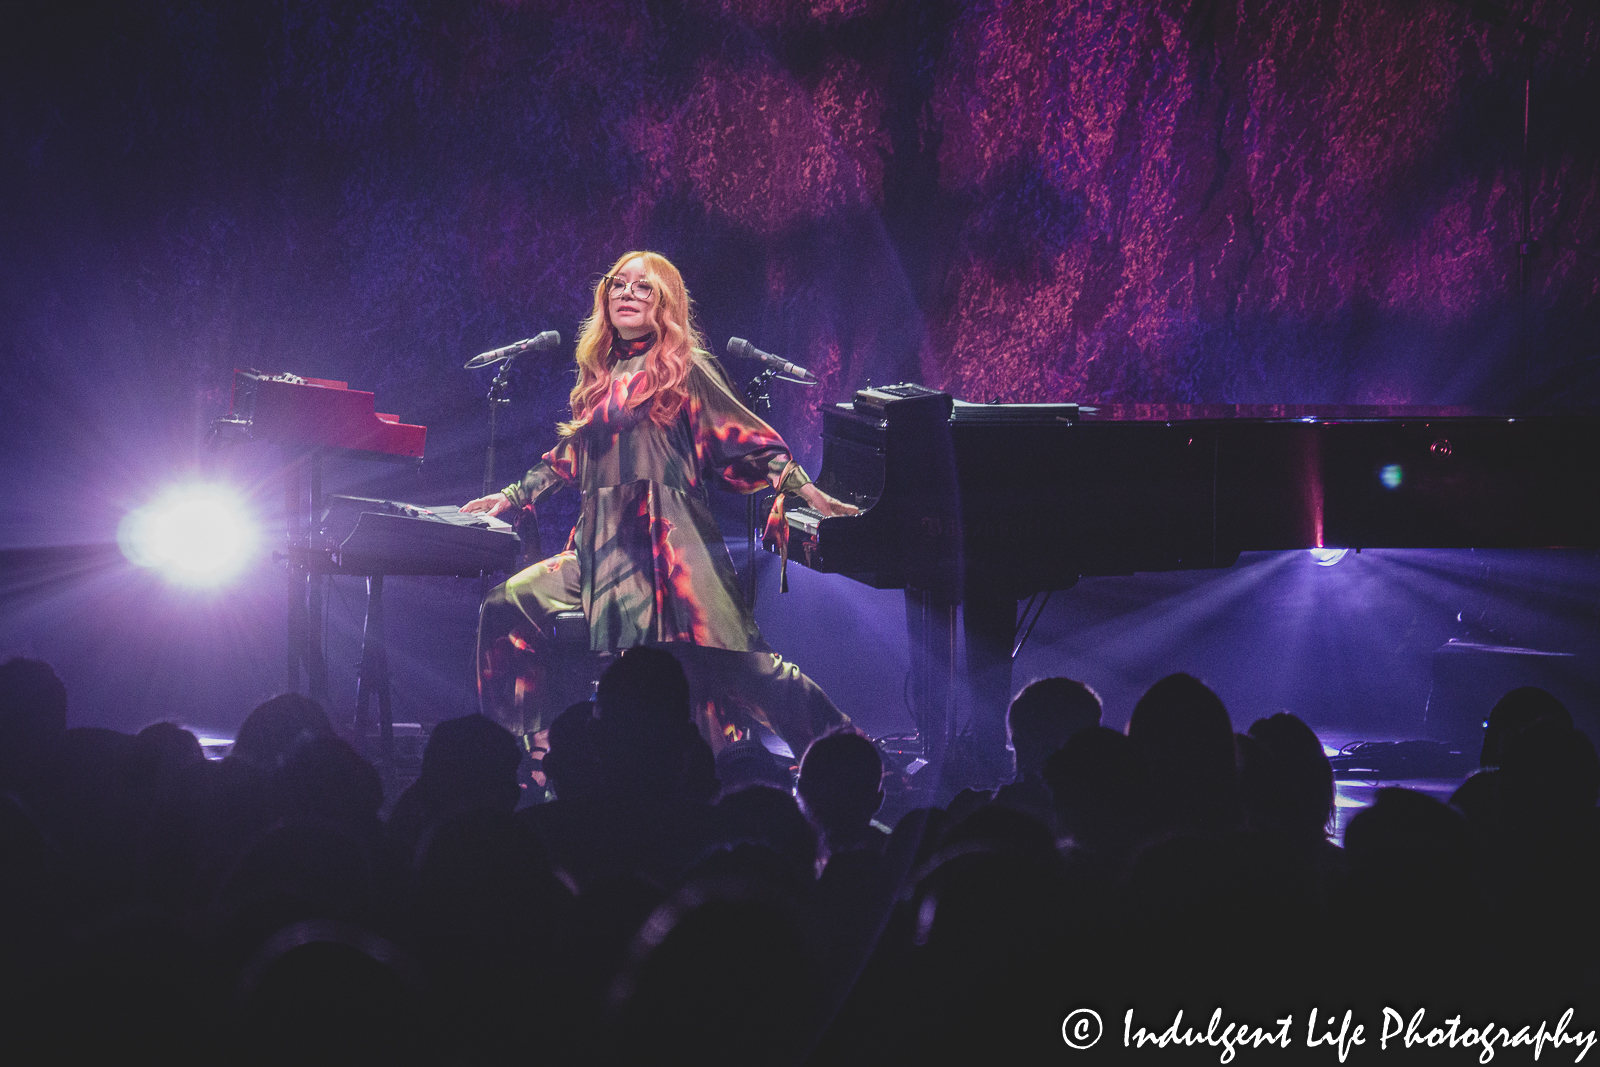 Live concert performance at Music Hall in downtown Kansas City, MO featuring pop rock artist Tori Amos on May 31, 2022.